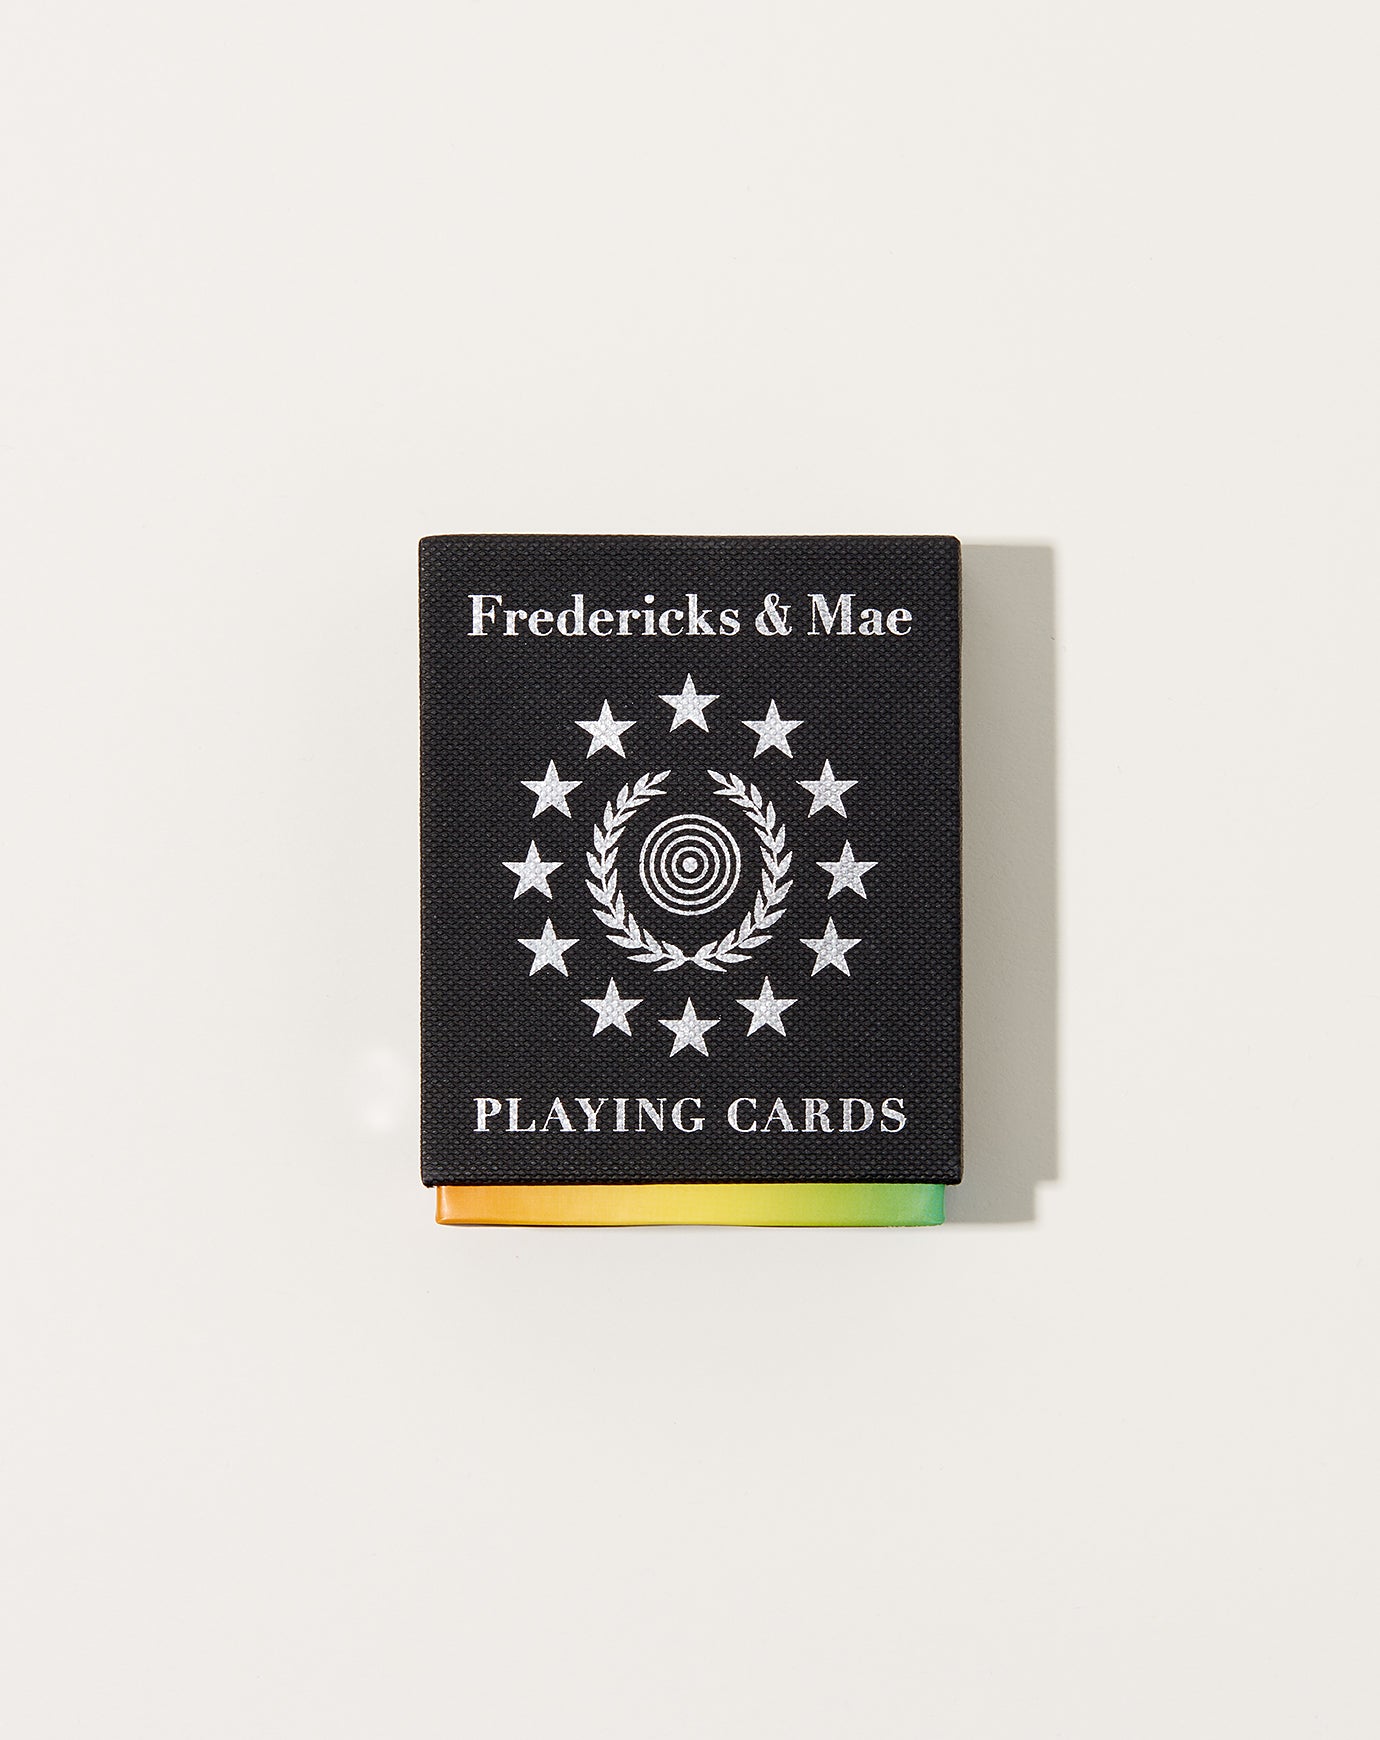 Fredericks and Mae Rainbow Playing Cards